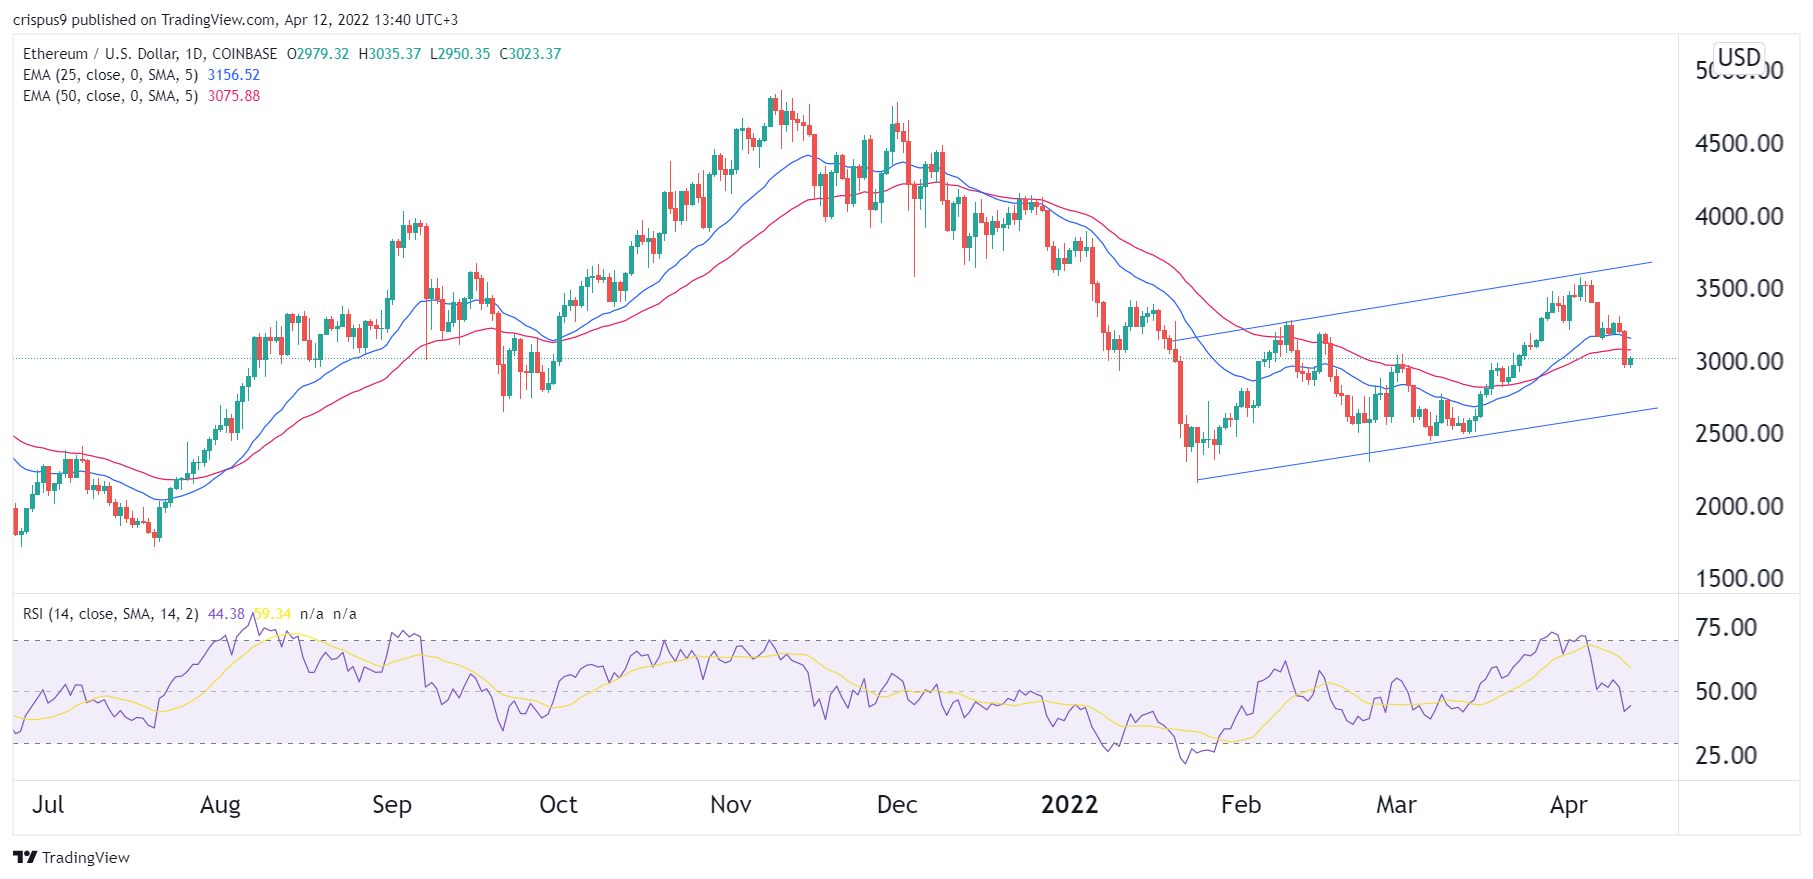 Ethereum price prediction: Channel signals a drop to ,650 likely